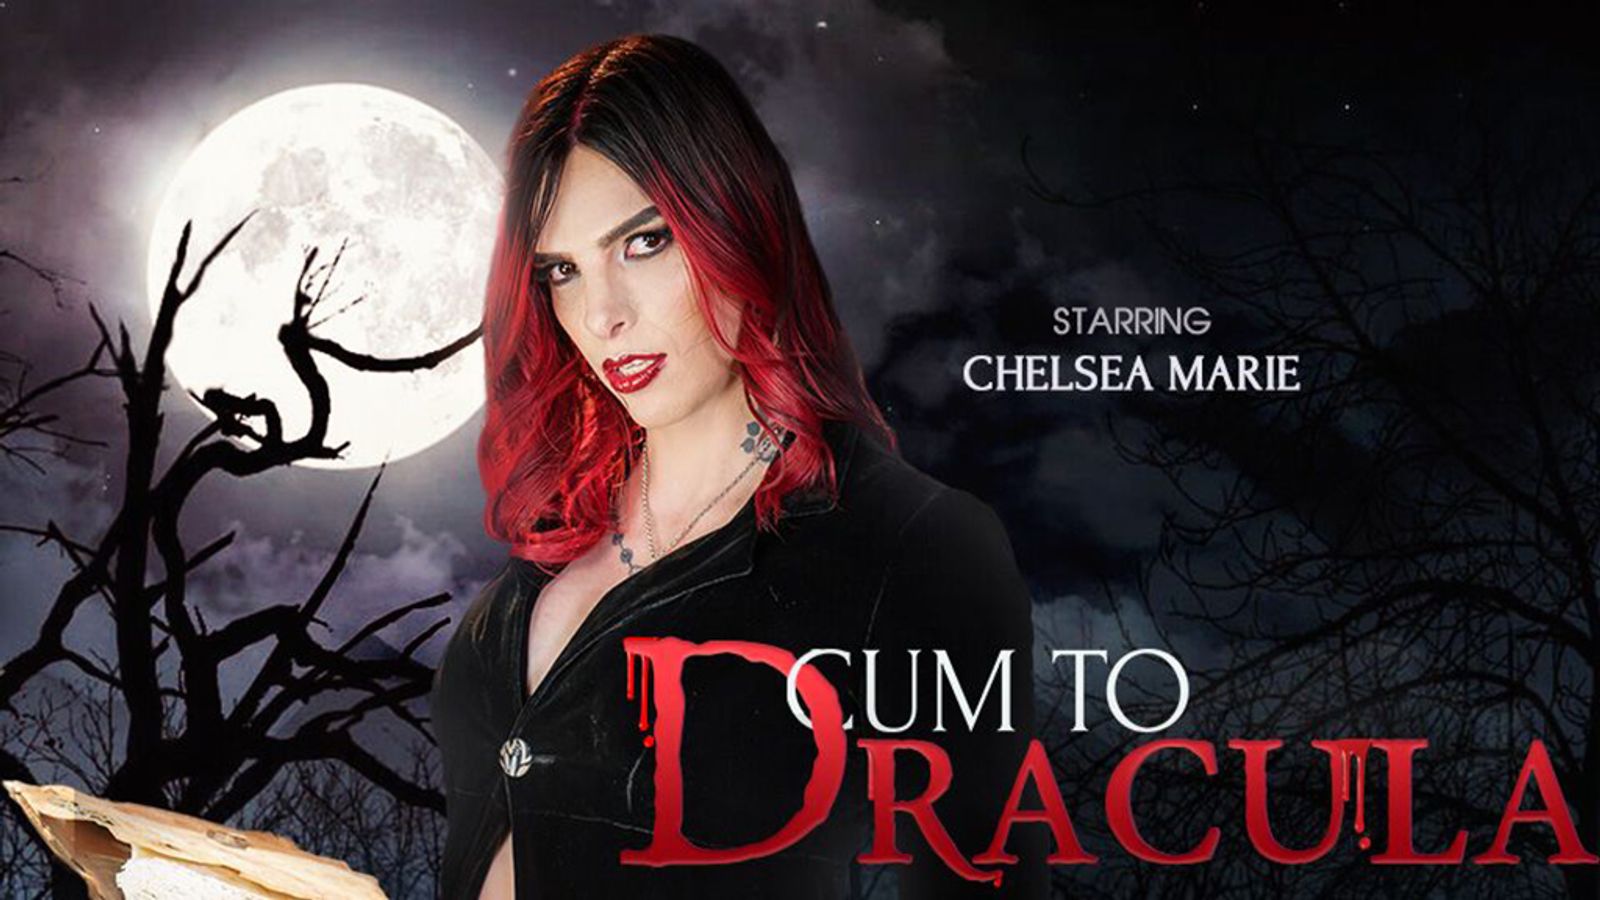 Those Who See Chelsea Marie Will Surely Want To 'Cum to Dracula'